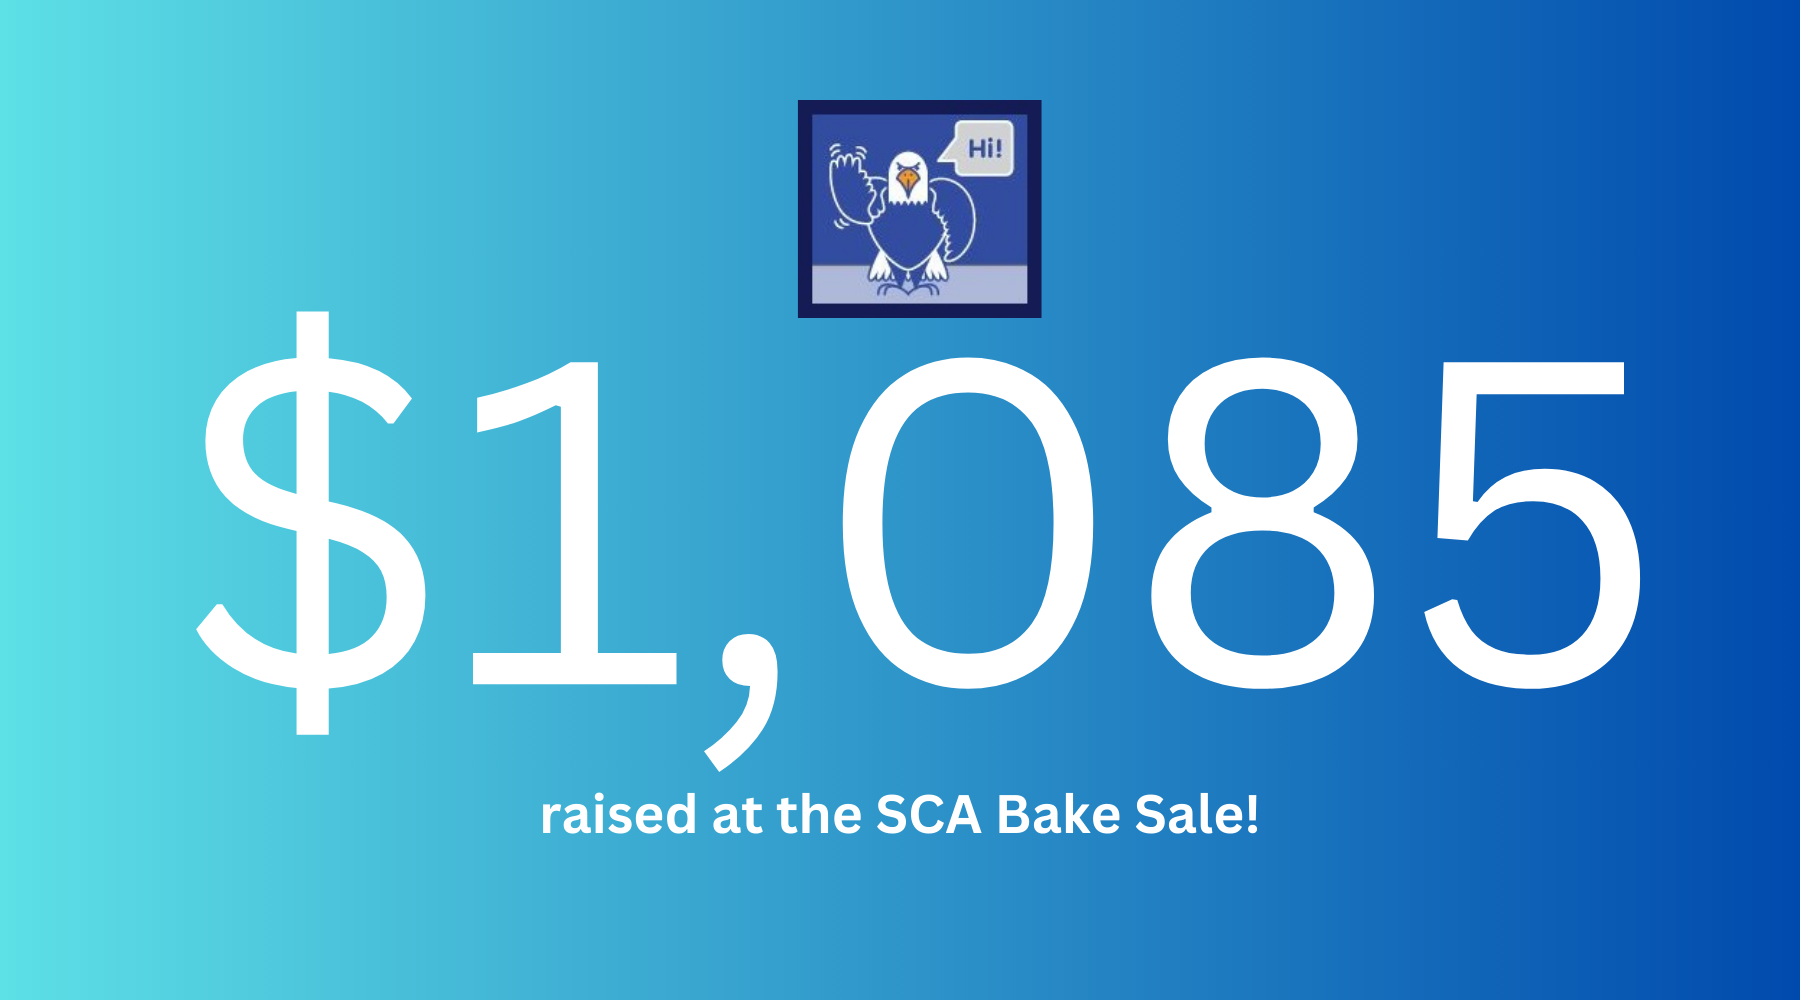 $1,085 dollars raised by SCA with blue background and Glebe eagle